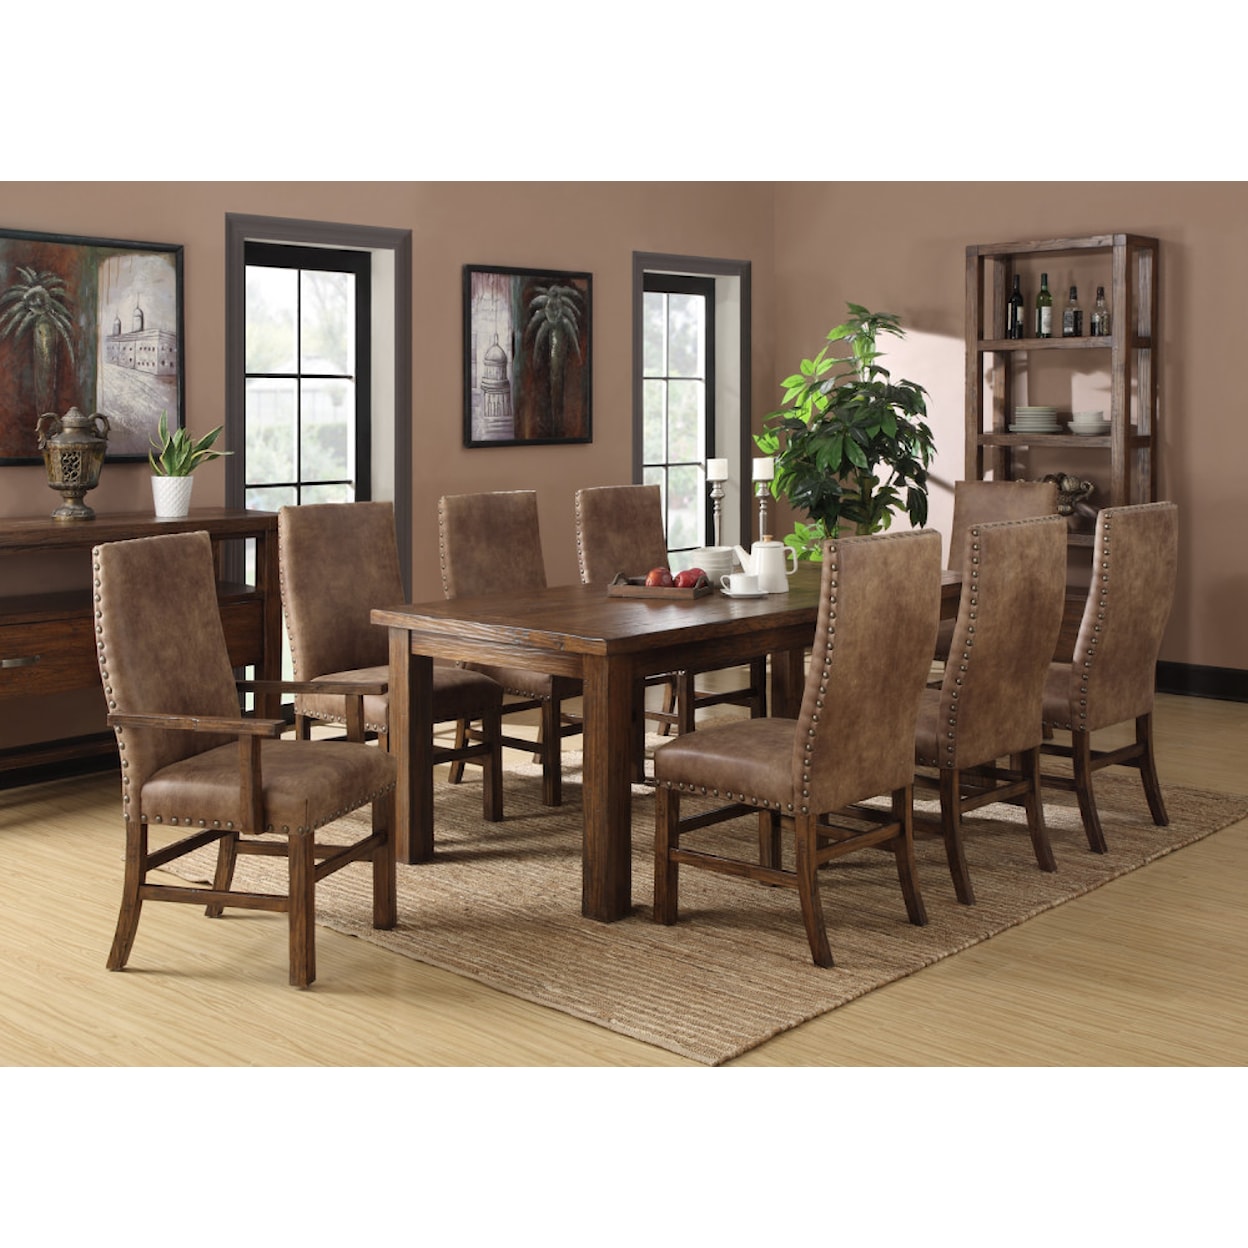 Emerald Chambers Creek Upholstered Dining Chair